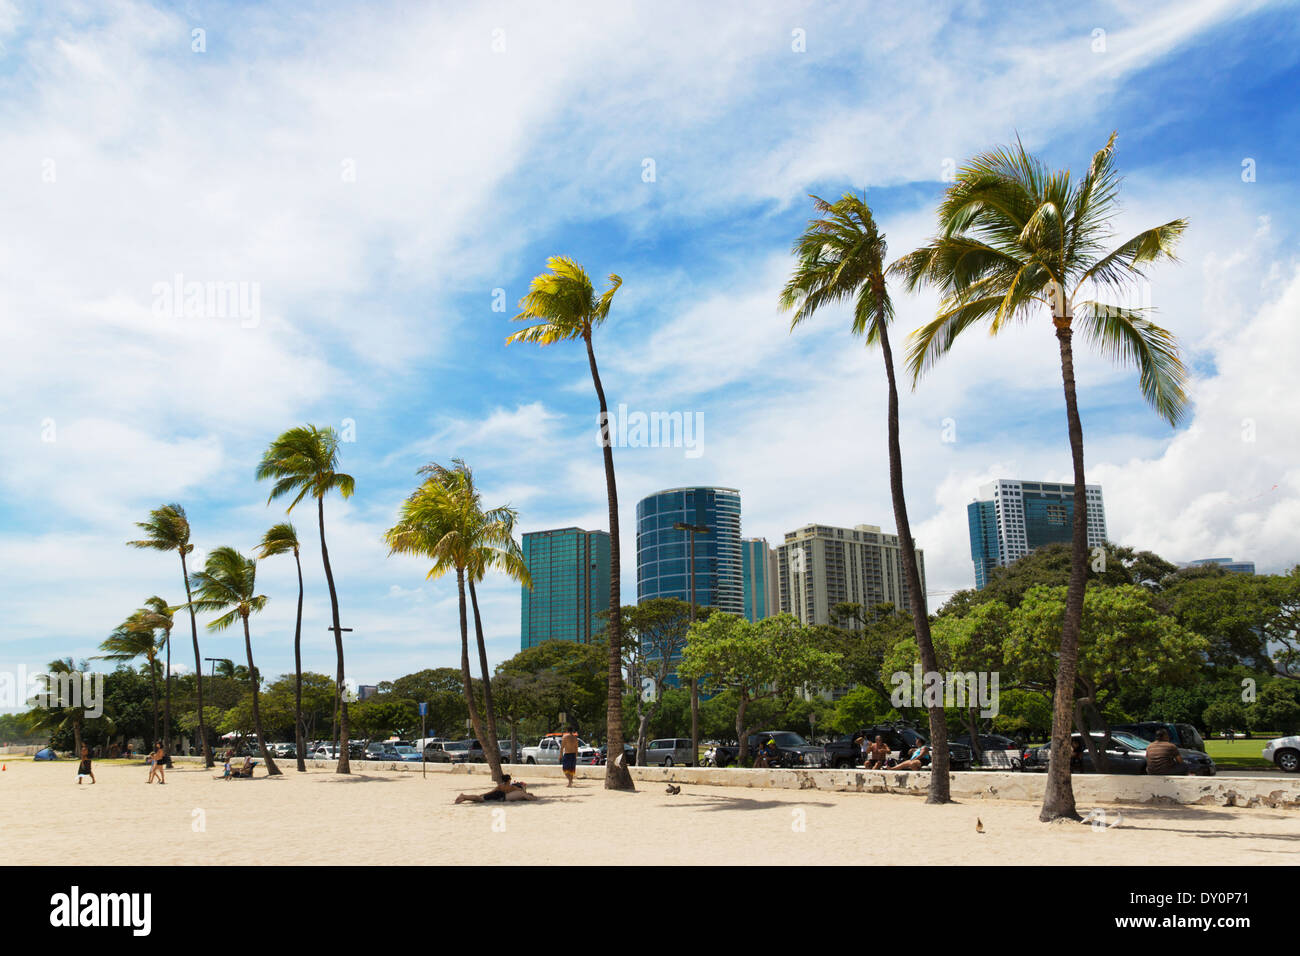 A beach lined with palm trees and buildings in the background; Honolulu, Oahu, Hawaii, United States of America Stock Photo